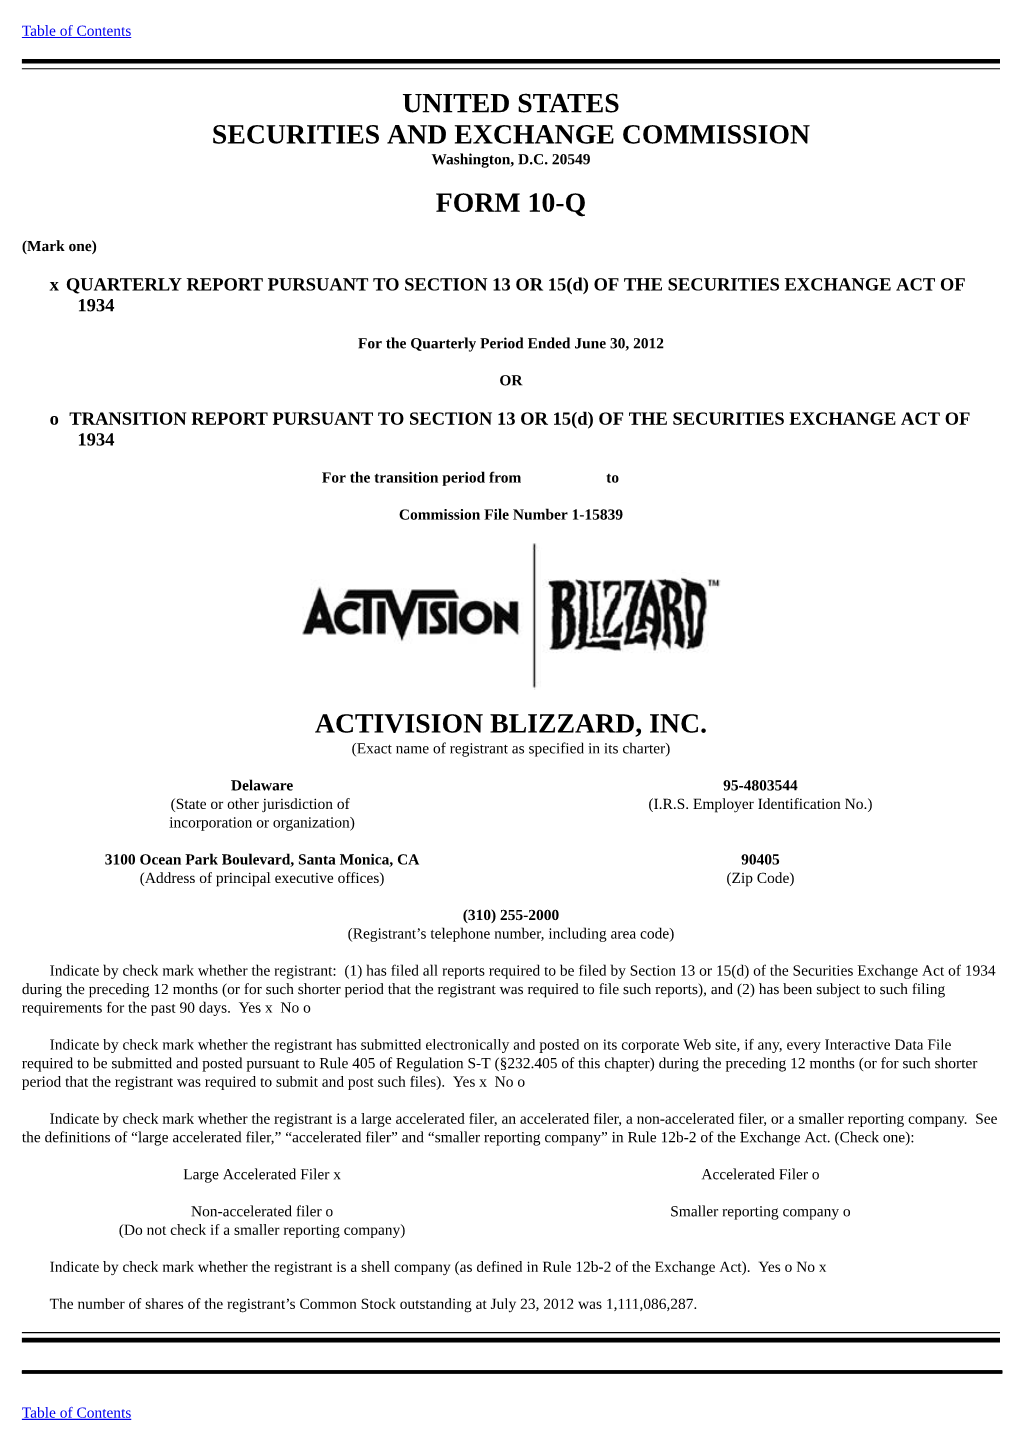 United States Securities and Exchange Commission Form 10-Q Activision Blizzard, Inc